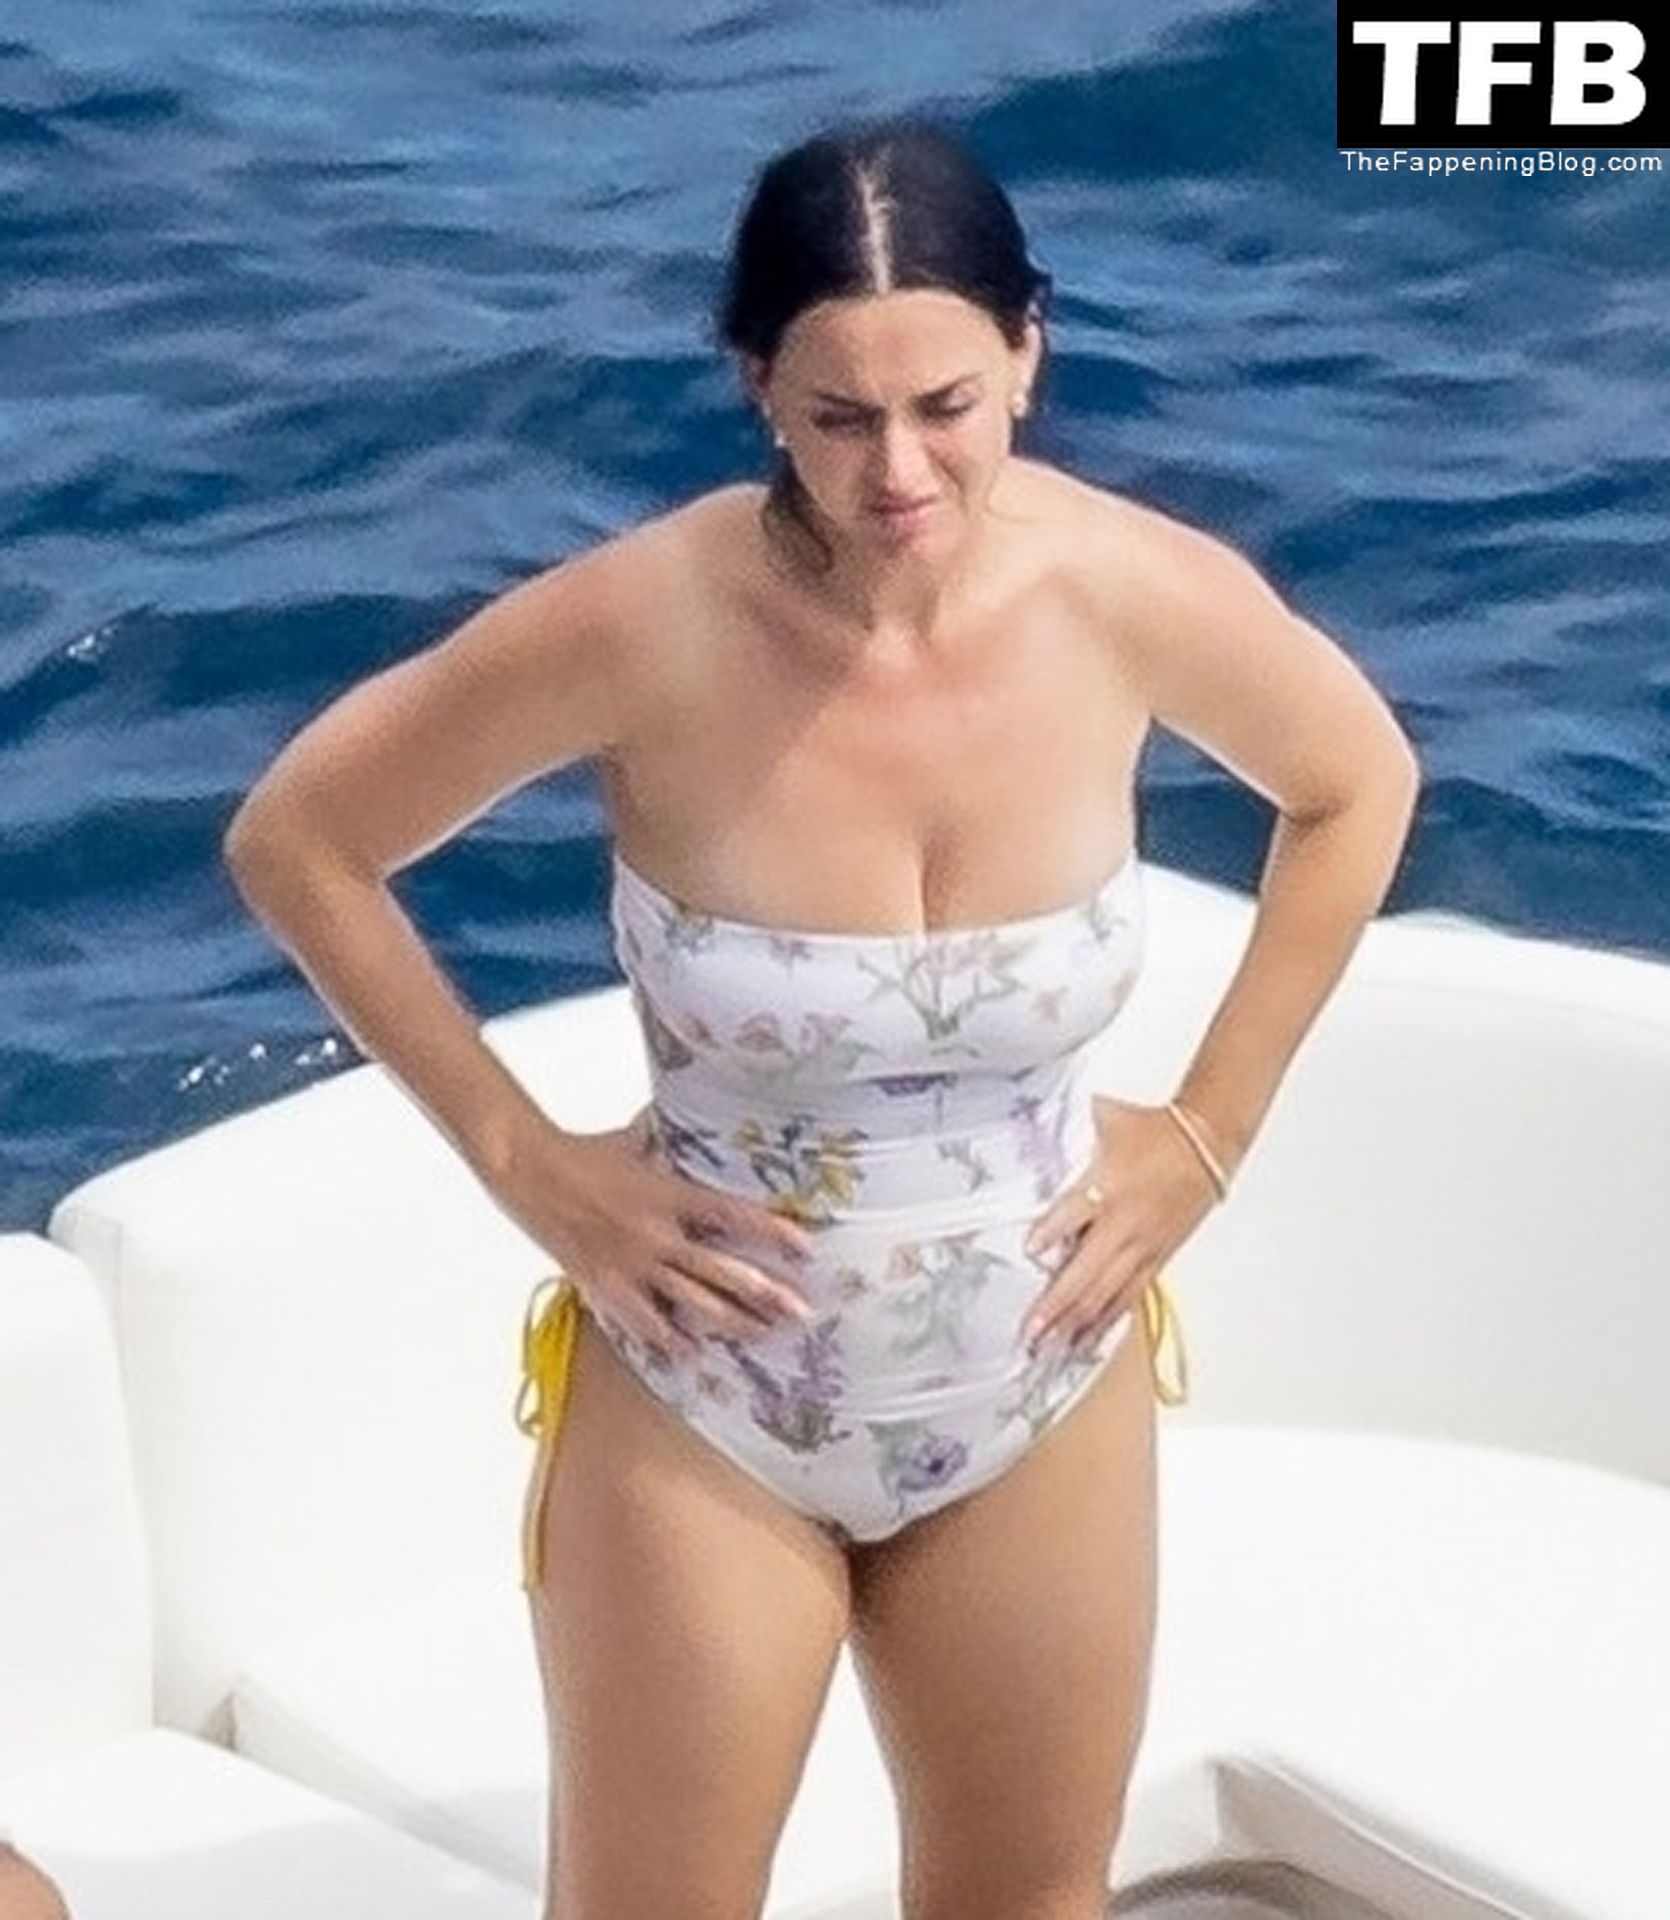 Katy Perry Rocks a Strapless Swimsuit While Enjoying a Beach Day with Orlando Bloom in Positano (105 Photos)